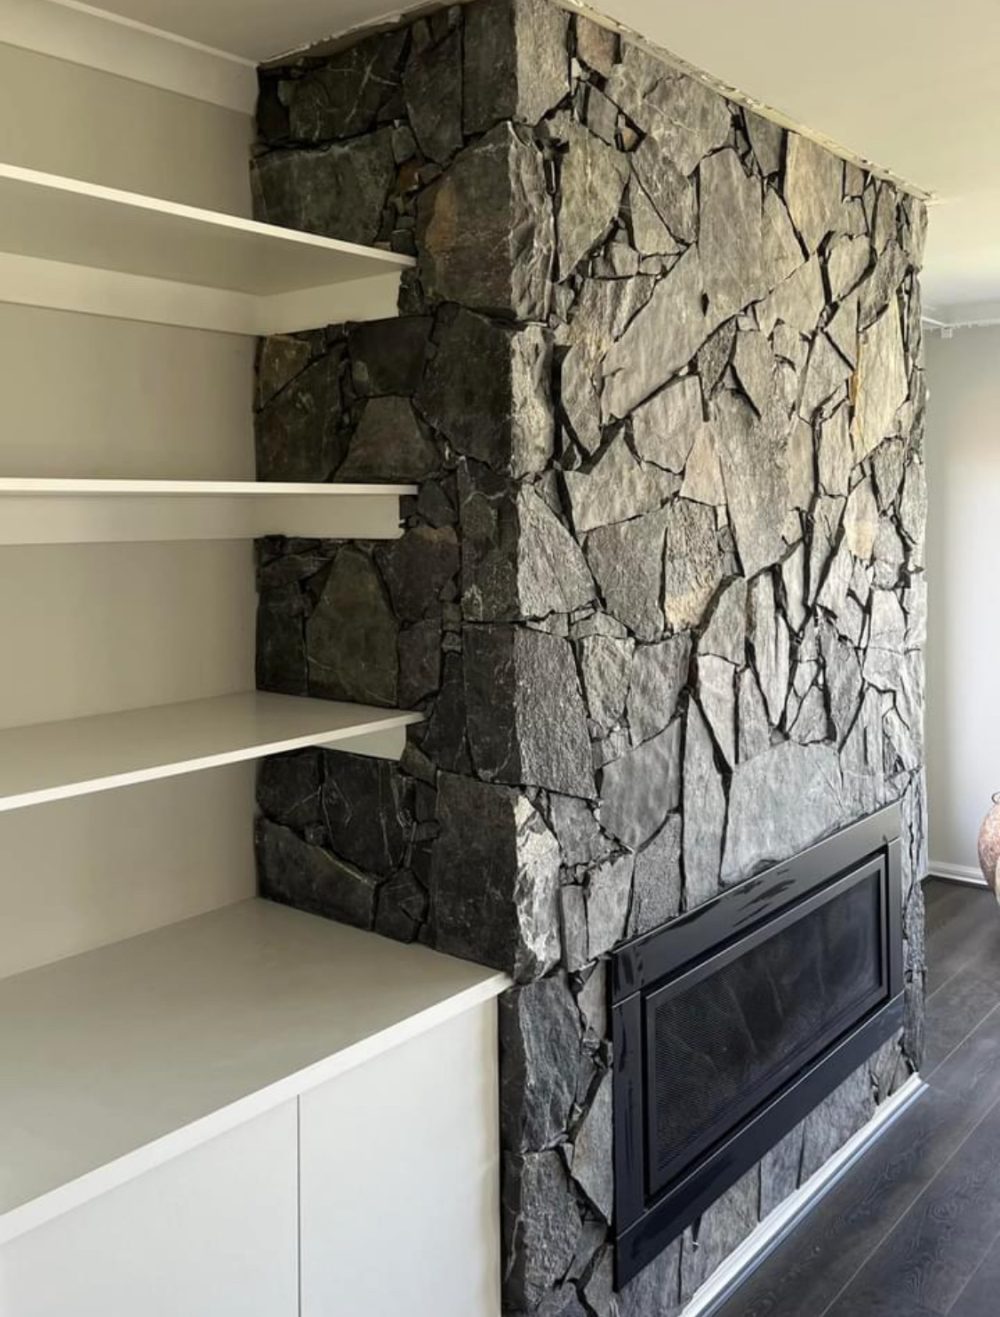 Luxor Stone Wall Cladding installed on a Fireplace.